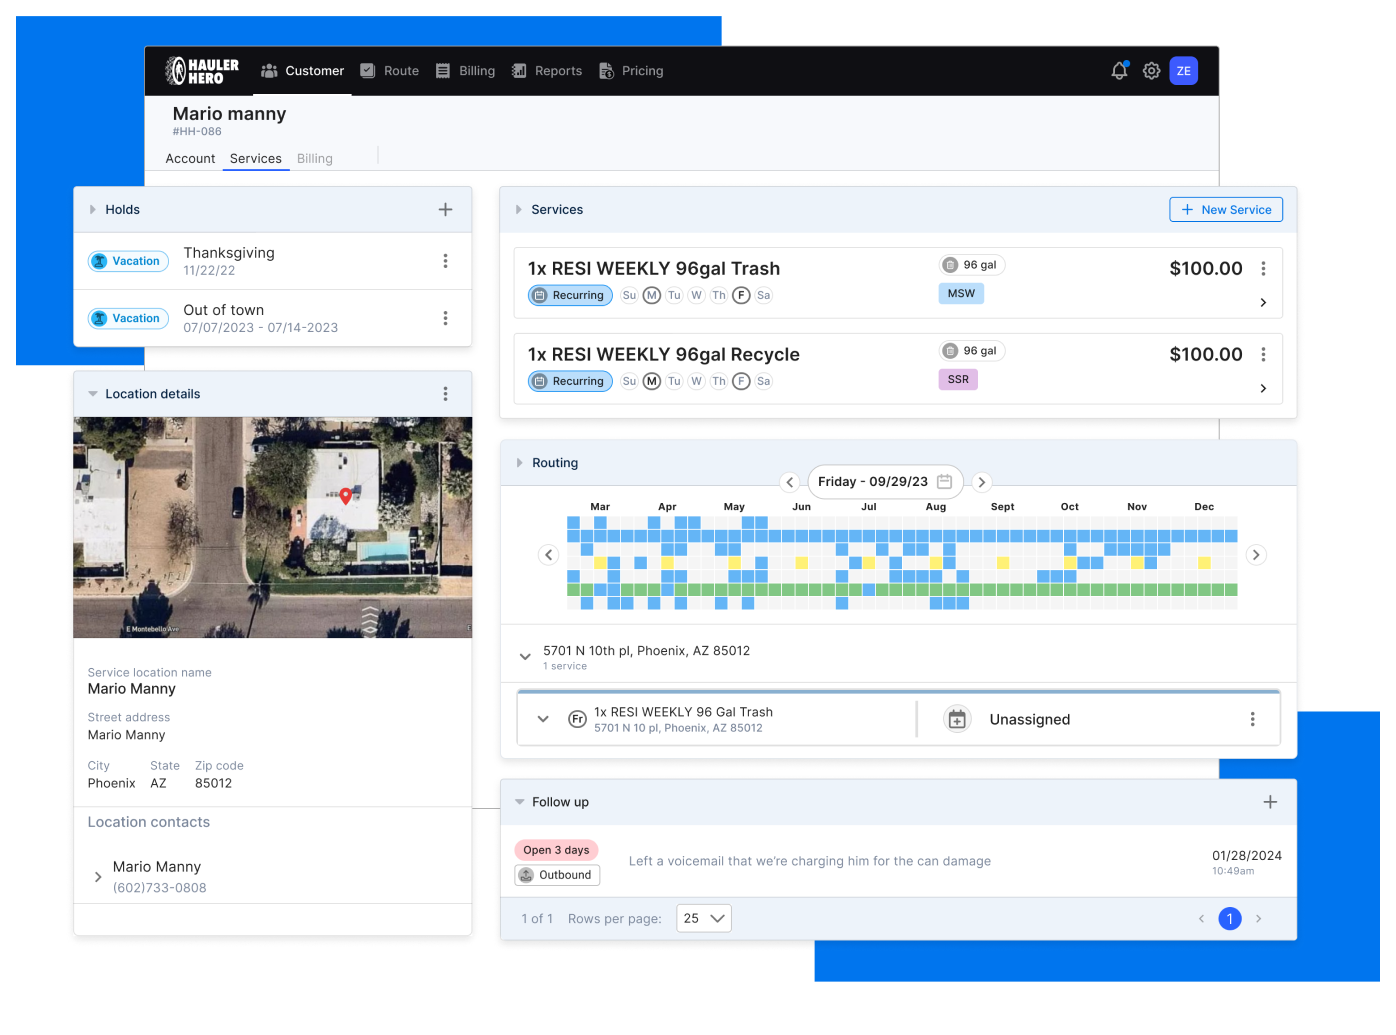 Manage details and monitor activity in one place 